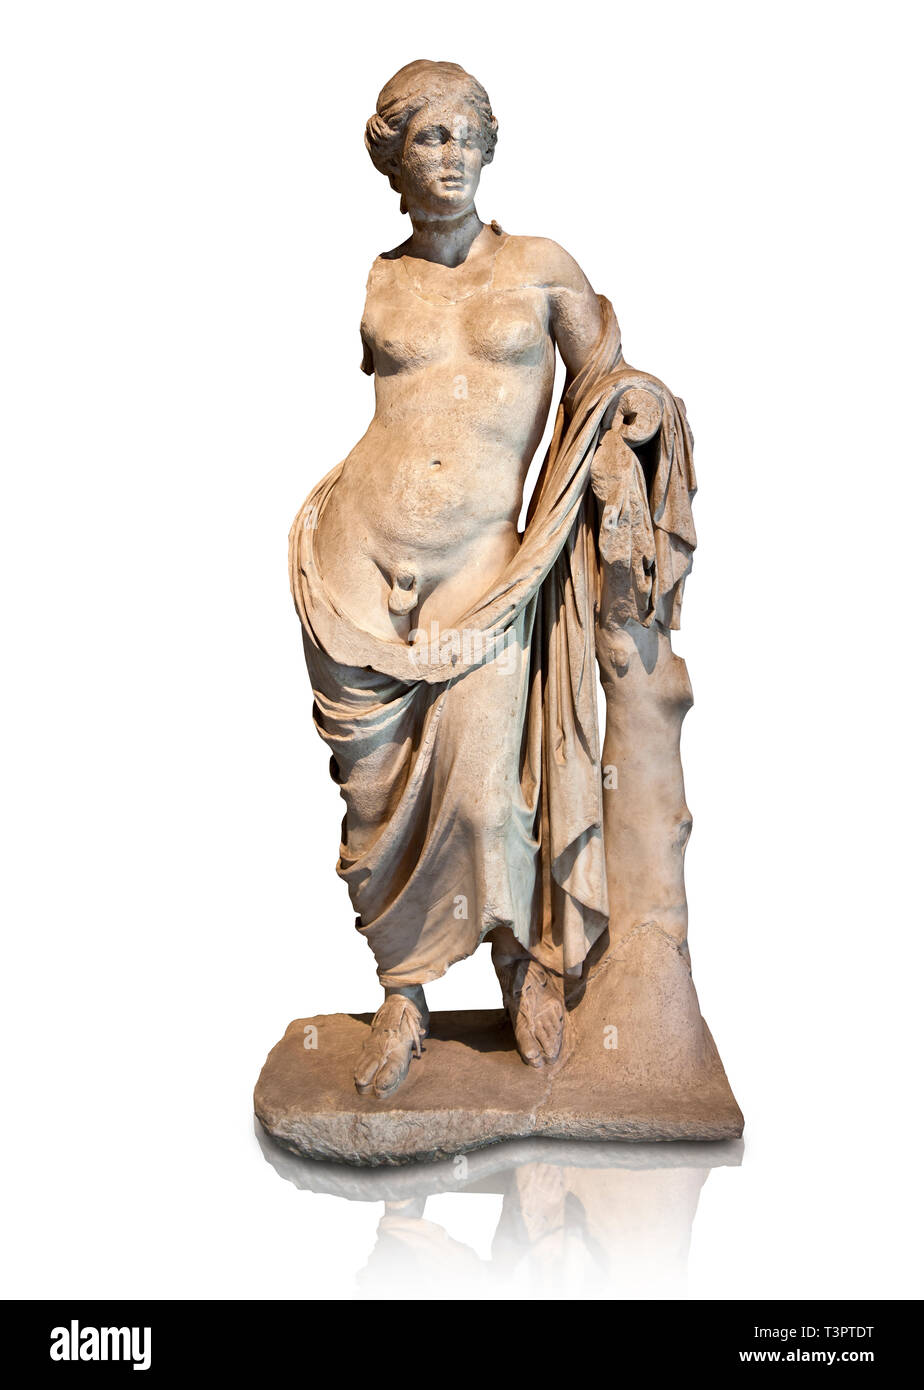 Greek marble Statue of Hermaphroditius ( Hermaphrodites) a mythical being that has both male & female characteristics. From Pergamum (Bergama) Turkey. Stock Photo